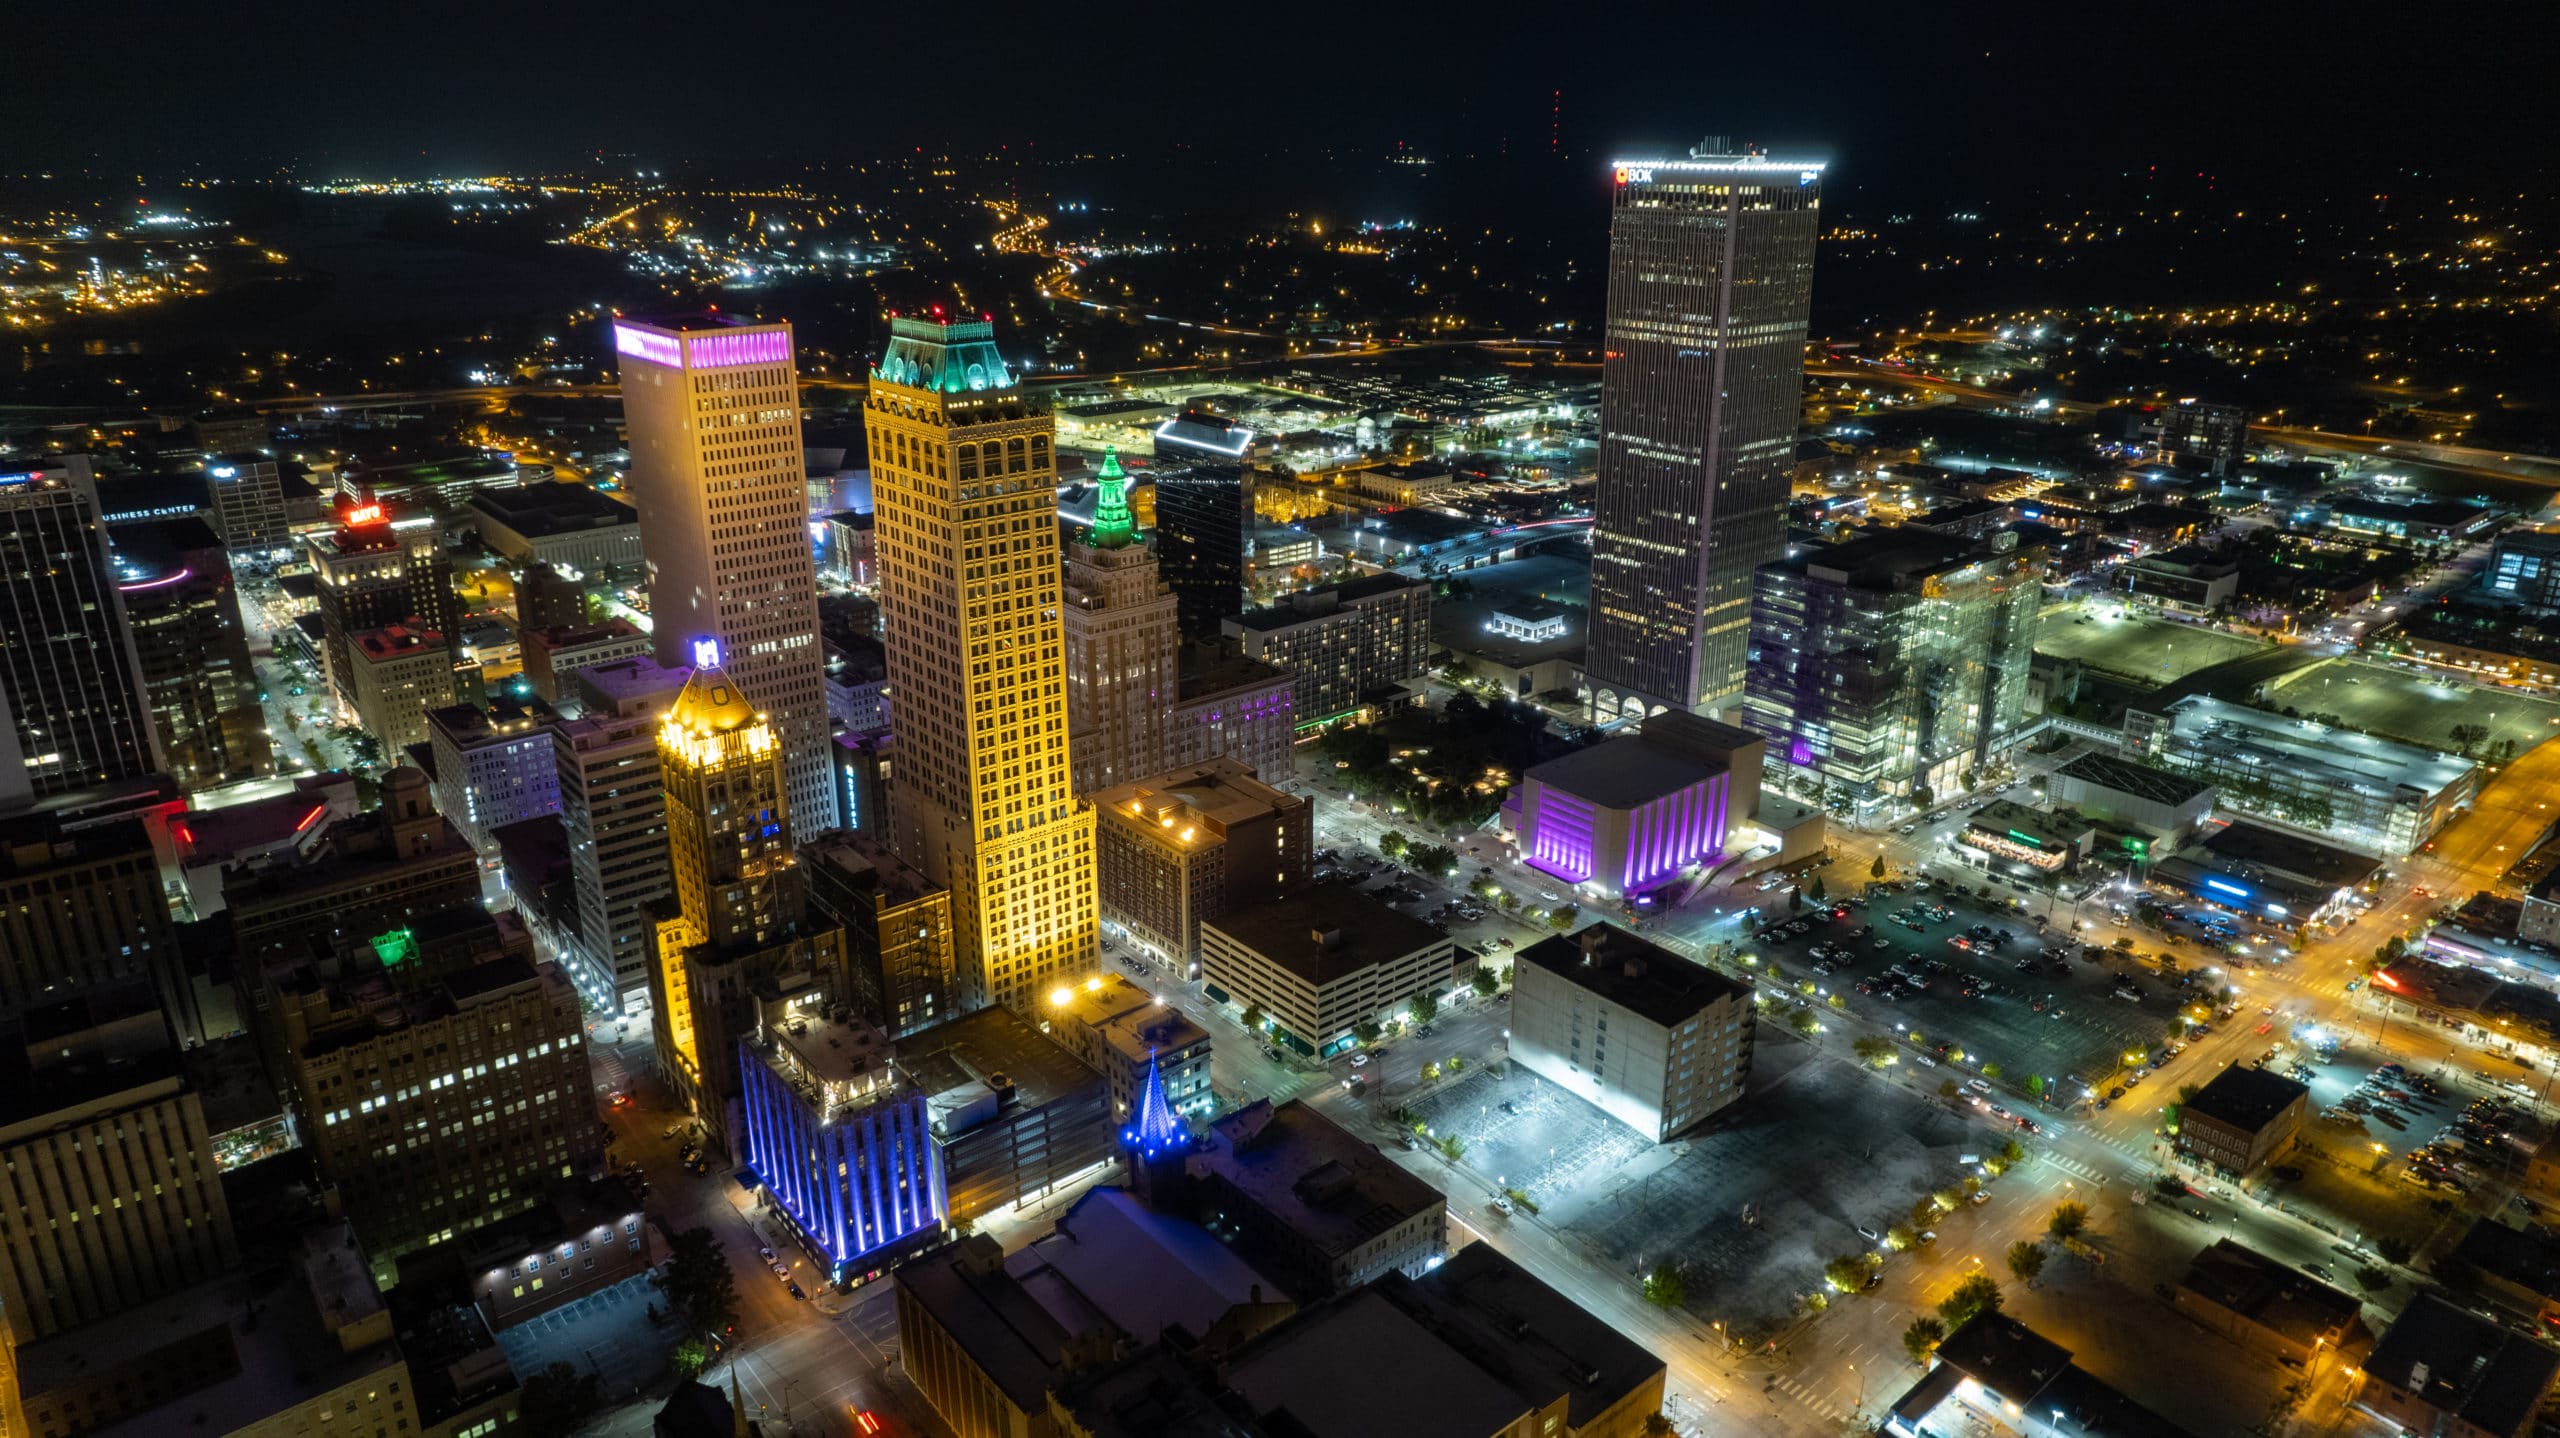 The Tulsa Skyline at Night, lit to perfection. Drone Photo by Digon Design